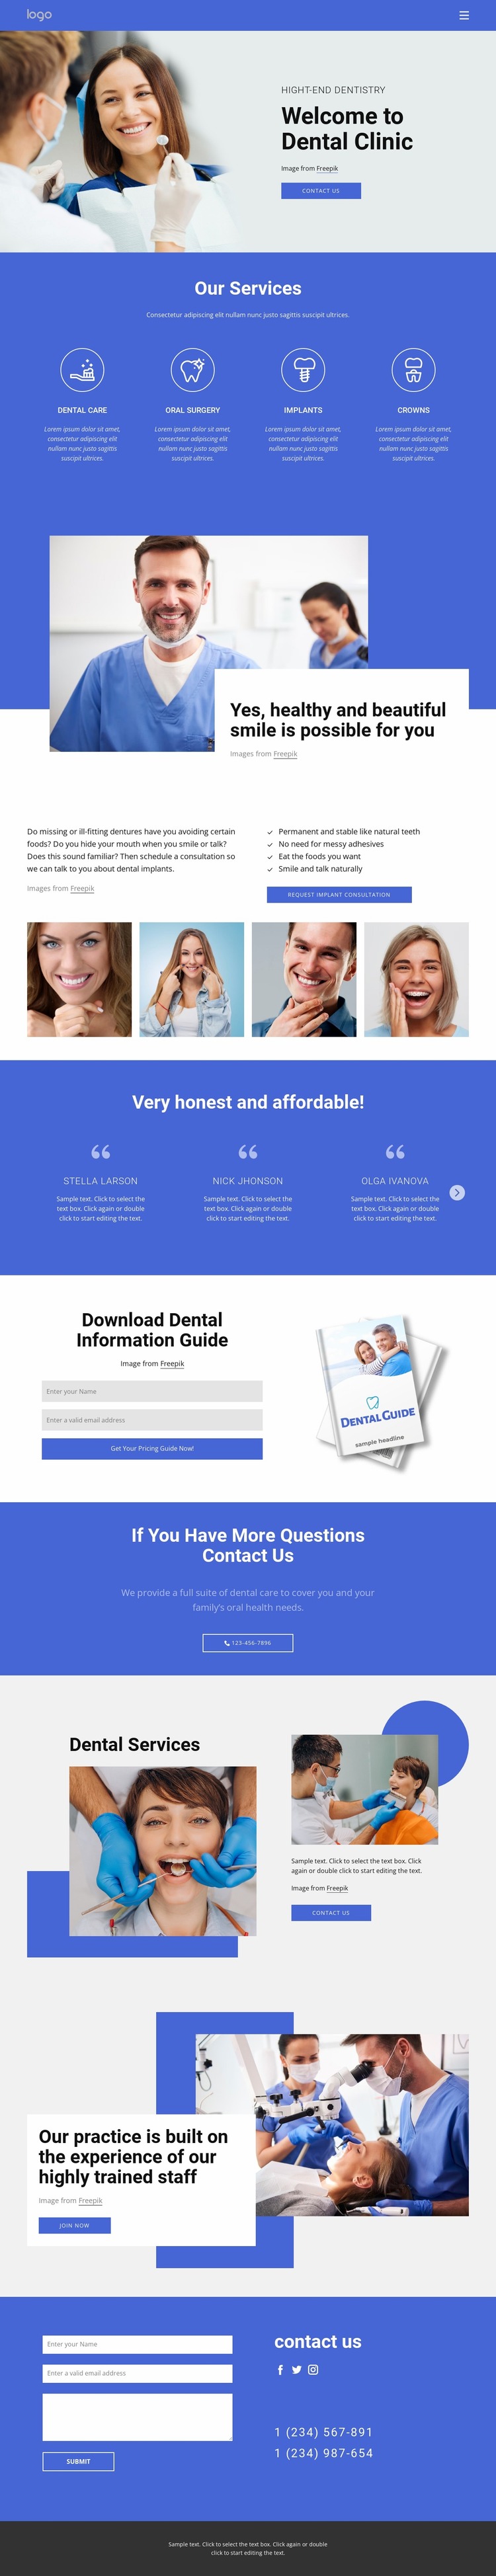 Welcome to dental clinic Website Mockup